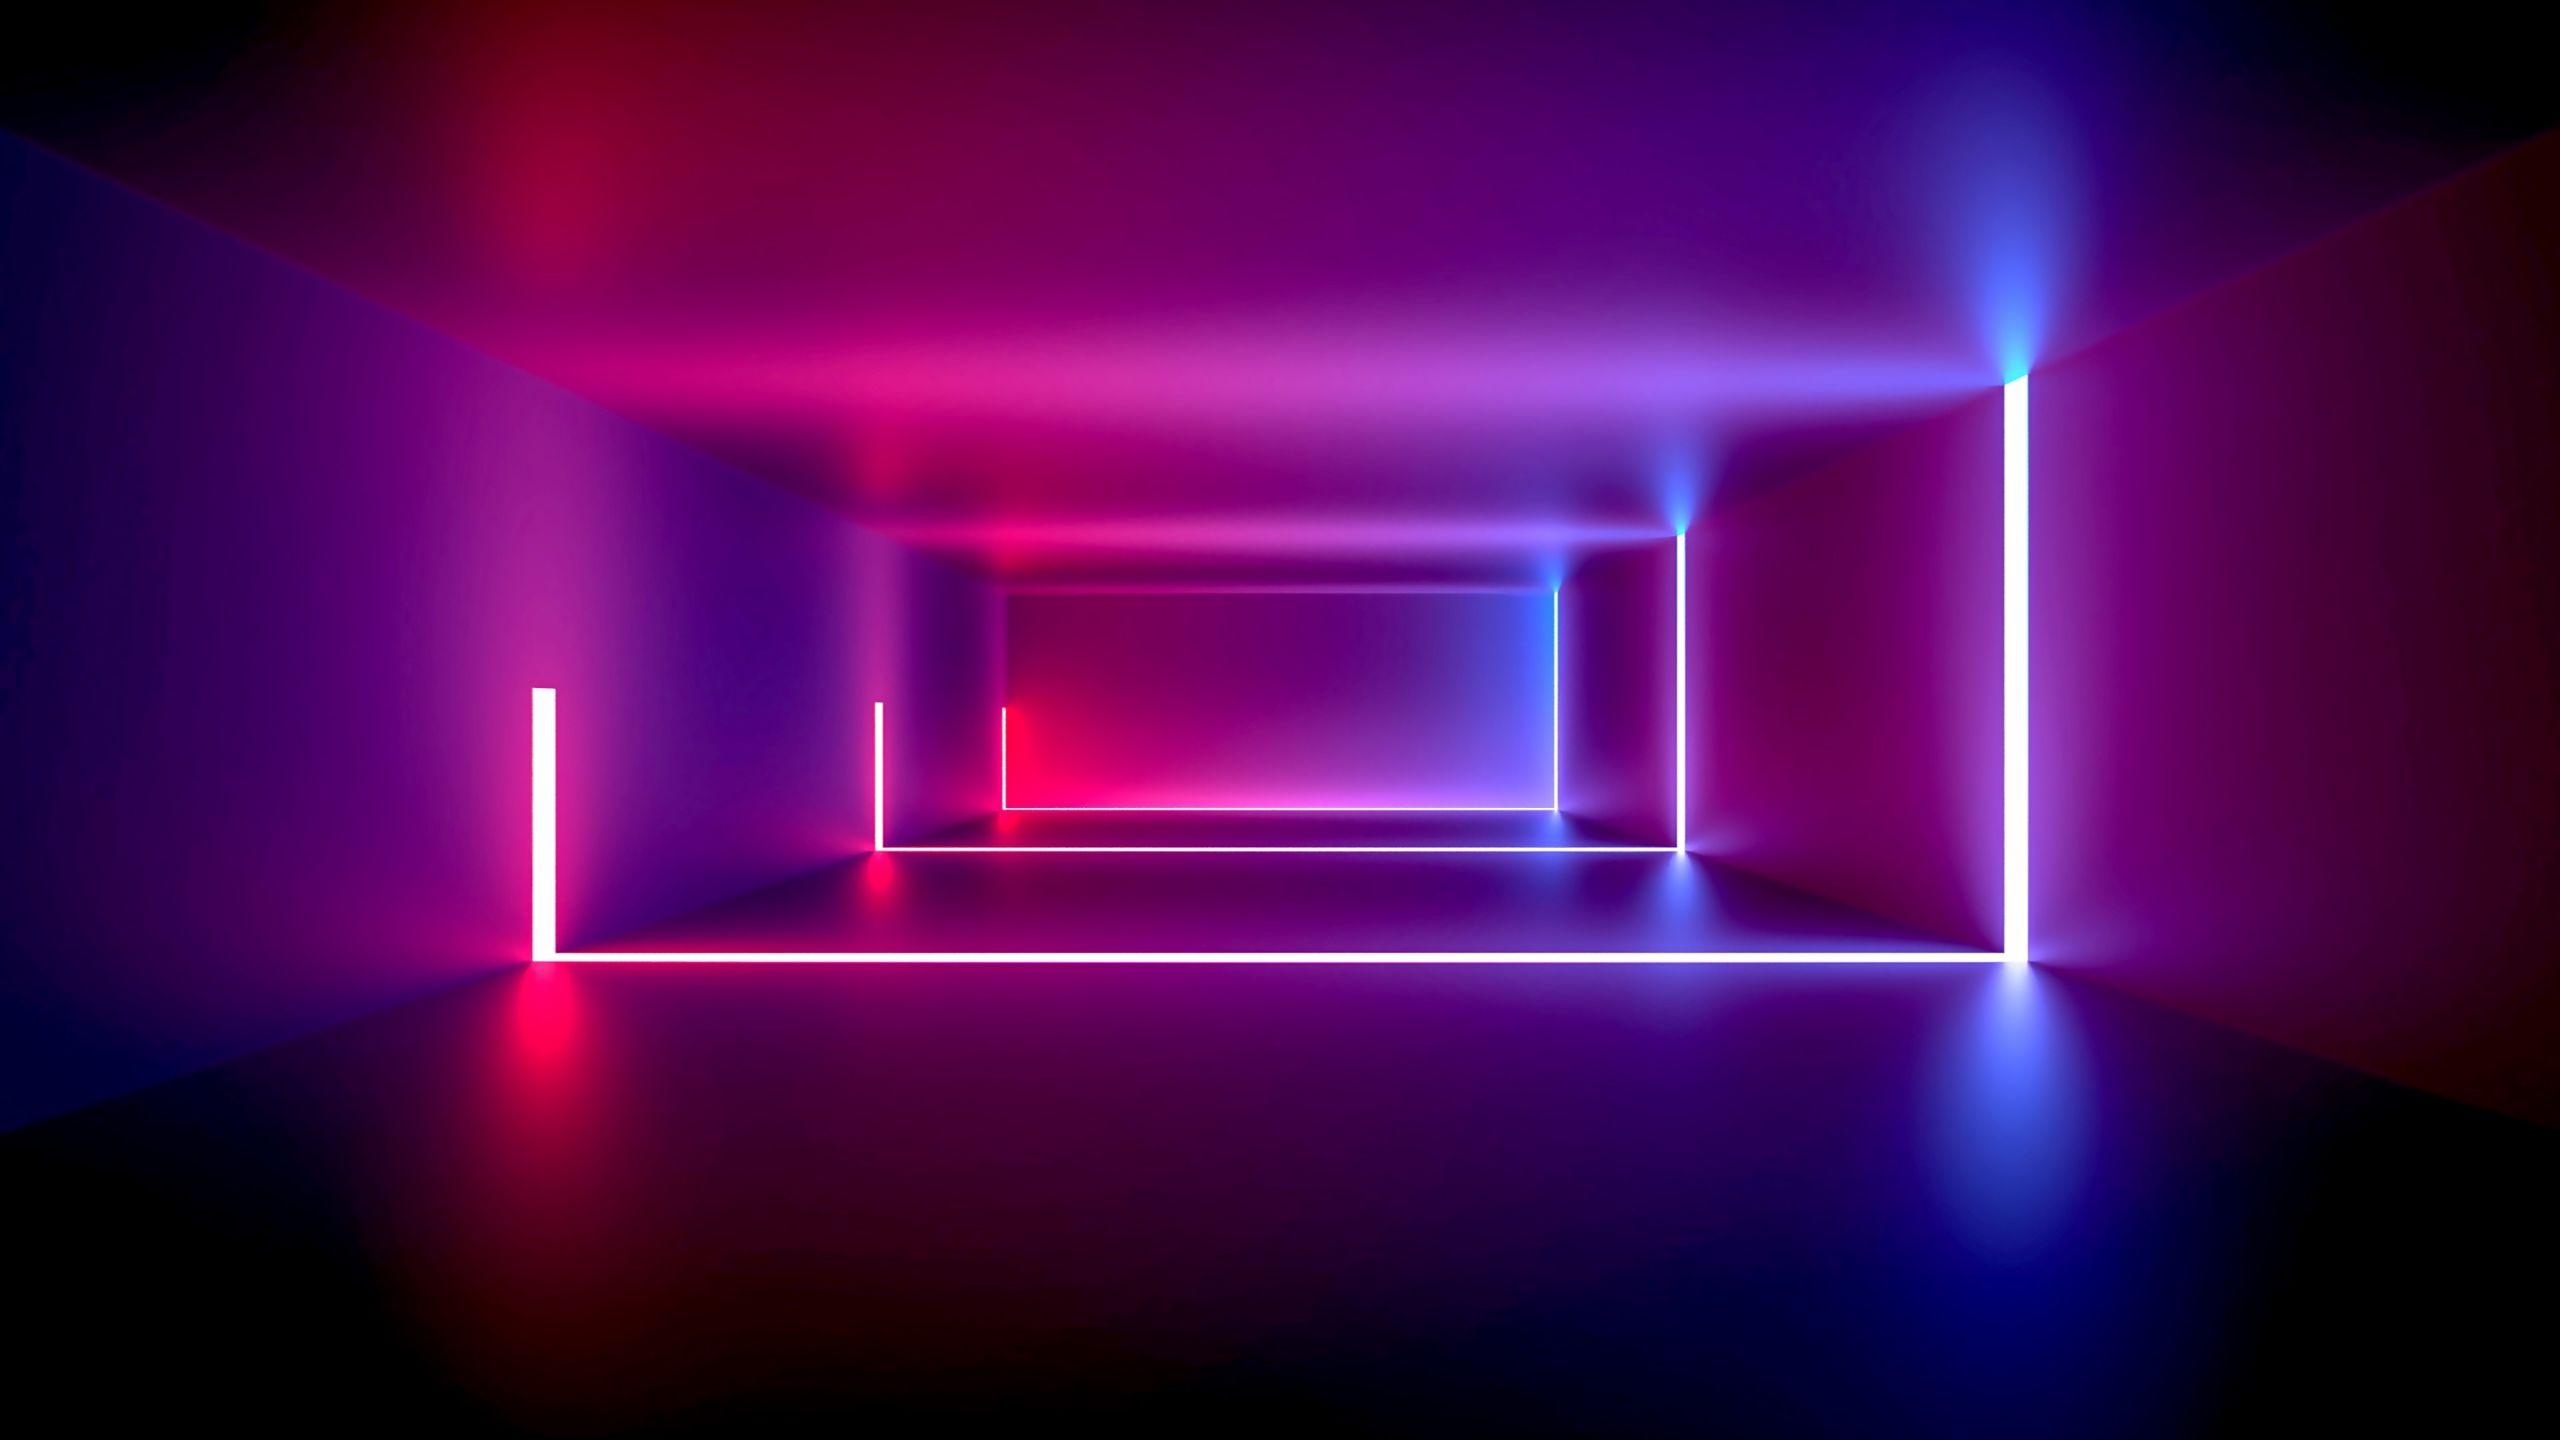 Neon Lights Hd Wallpapers Top Free Neon Lights Hd Backgrounds